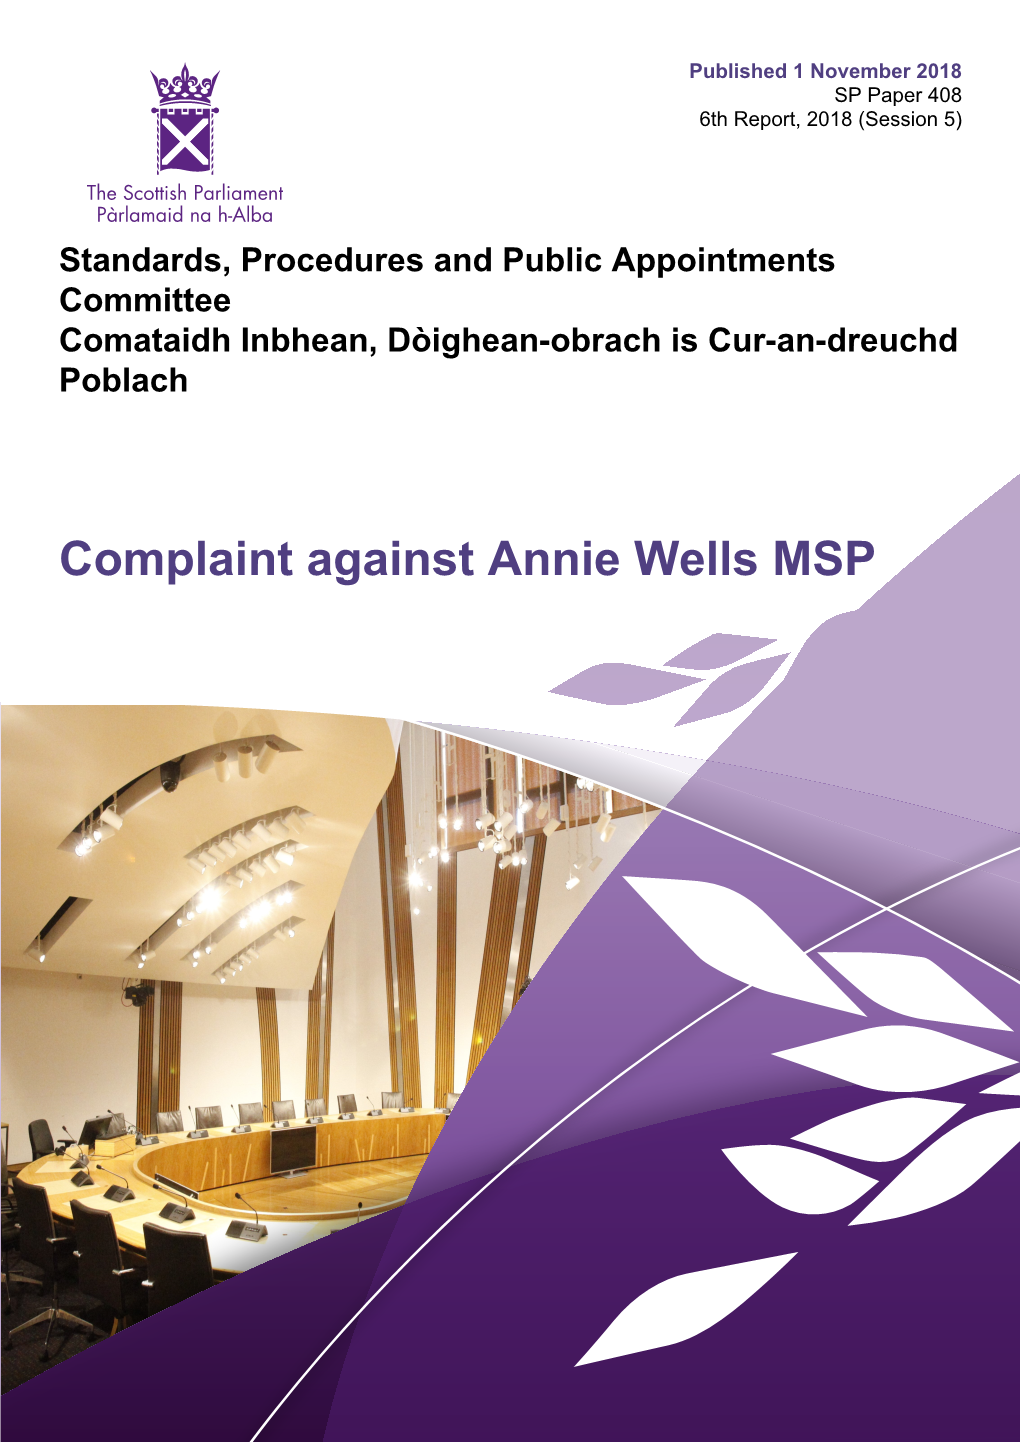 Complaint Against Annie Wells MSP Published in Scotland by the Scottish Parliamentary Corporate Body